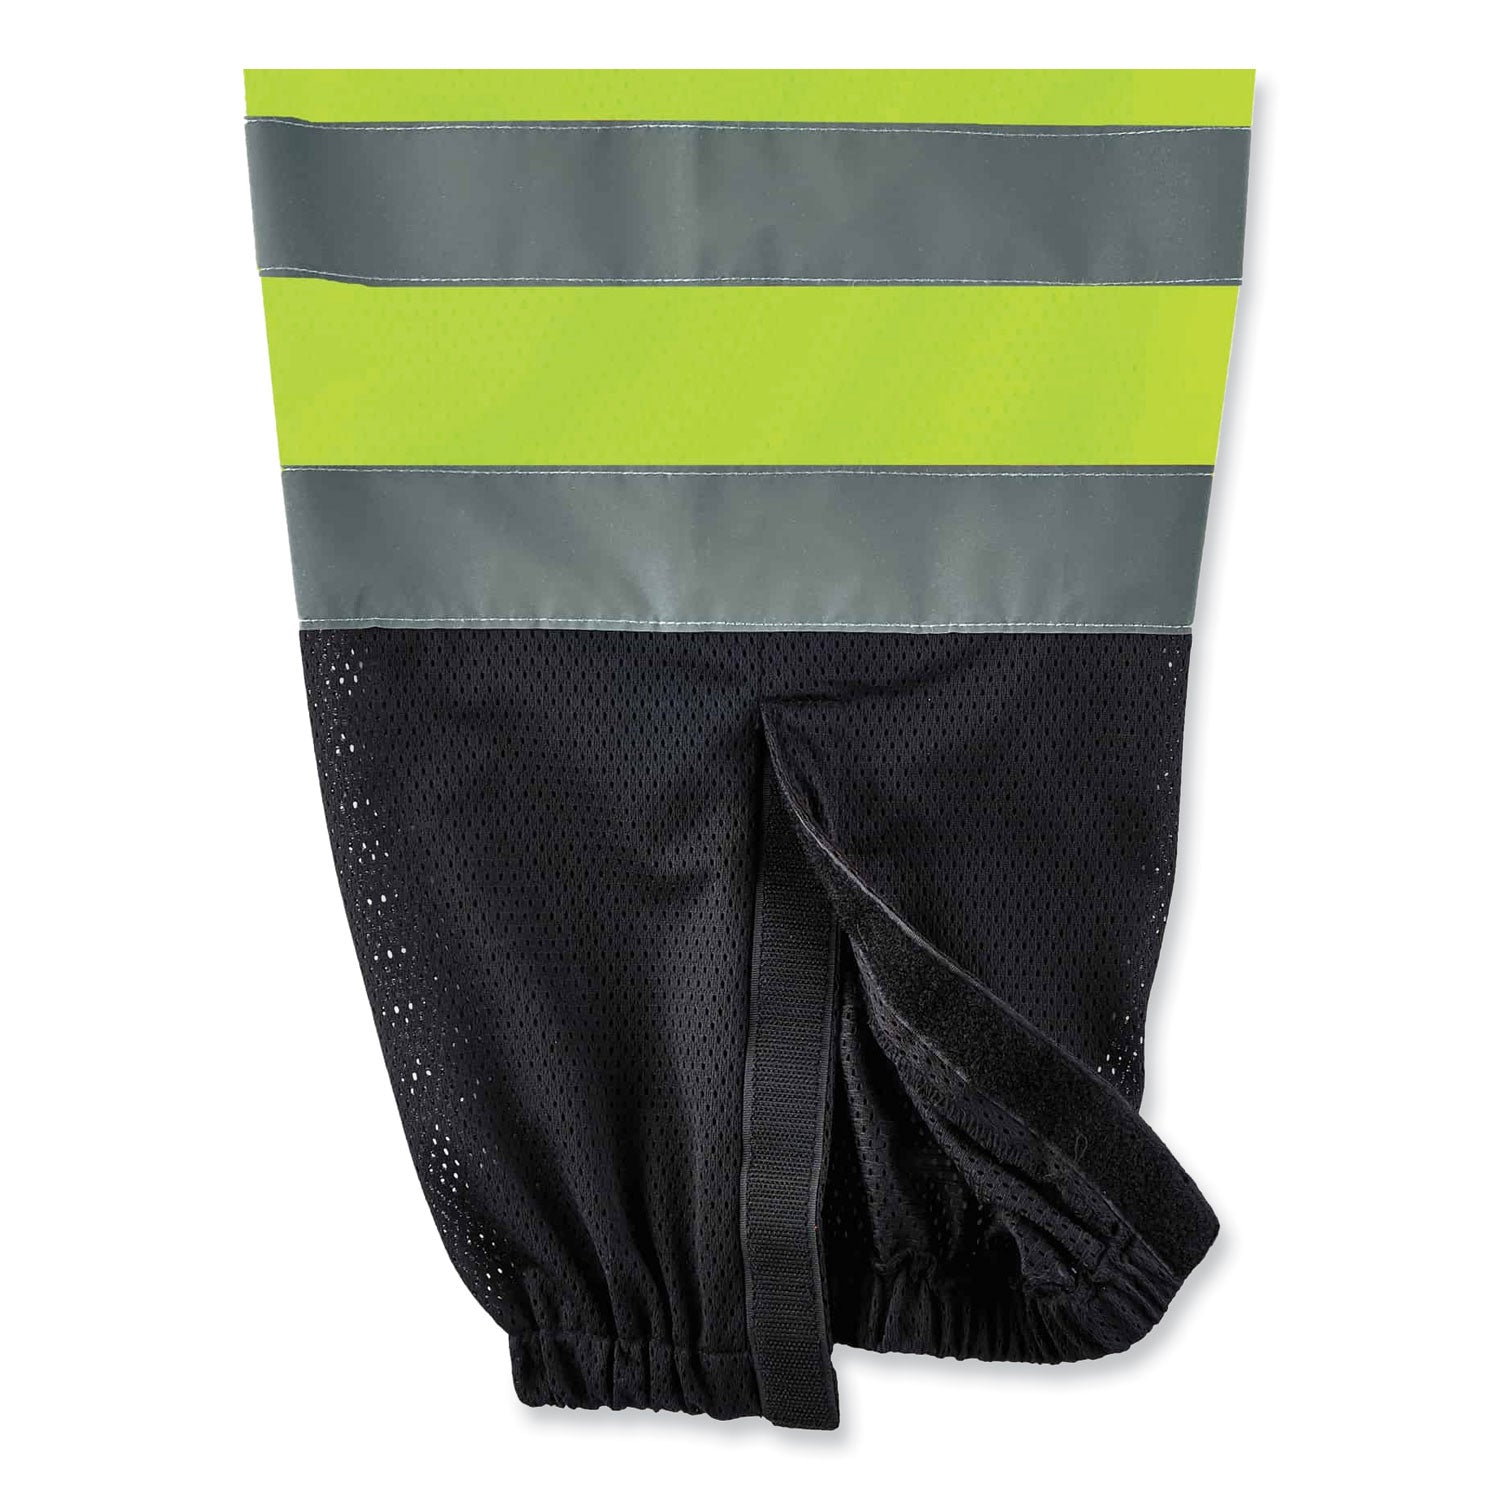 glowear-8910bk-class-e-hi-vis-pants-with-black-bottom-polyester-4x-large-5x-large-lime-ships-in-1-3-business-days_ego23959 - 3